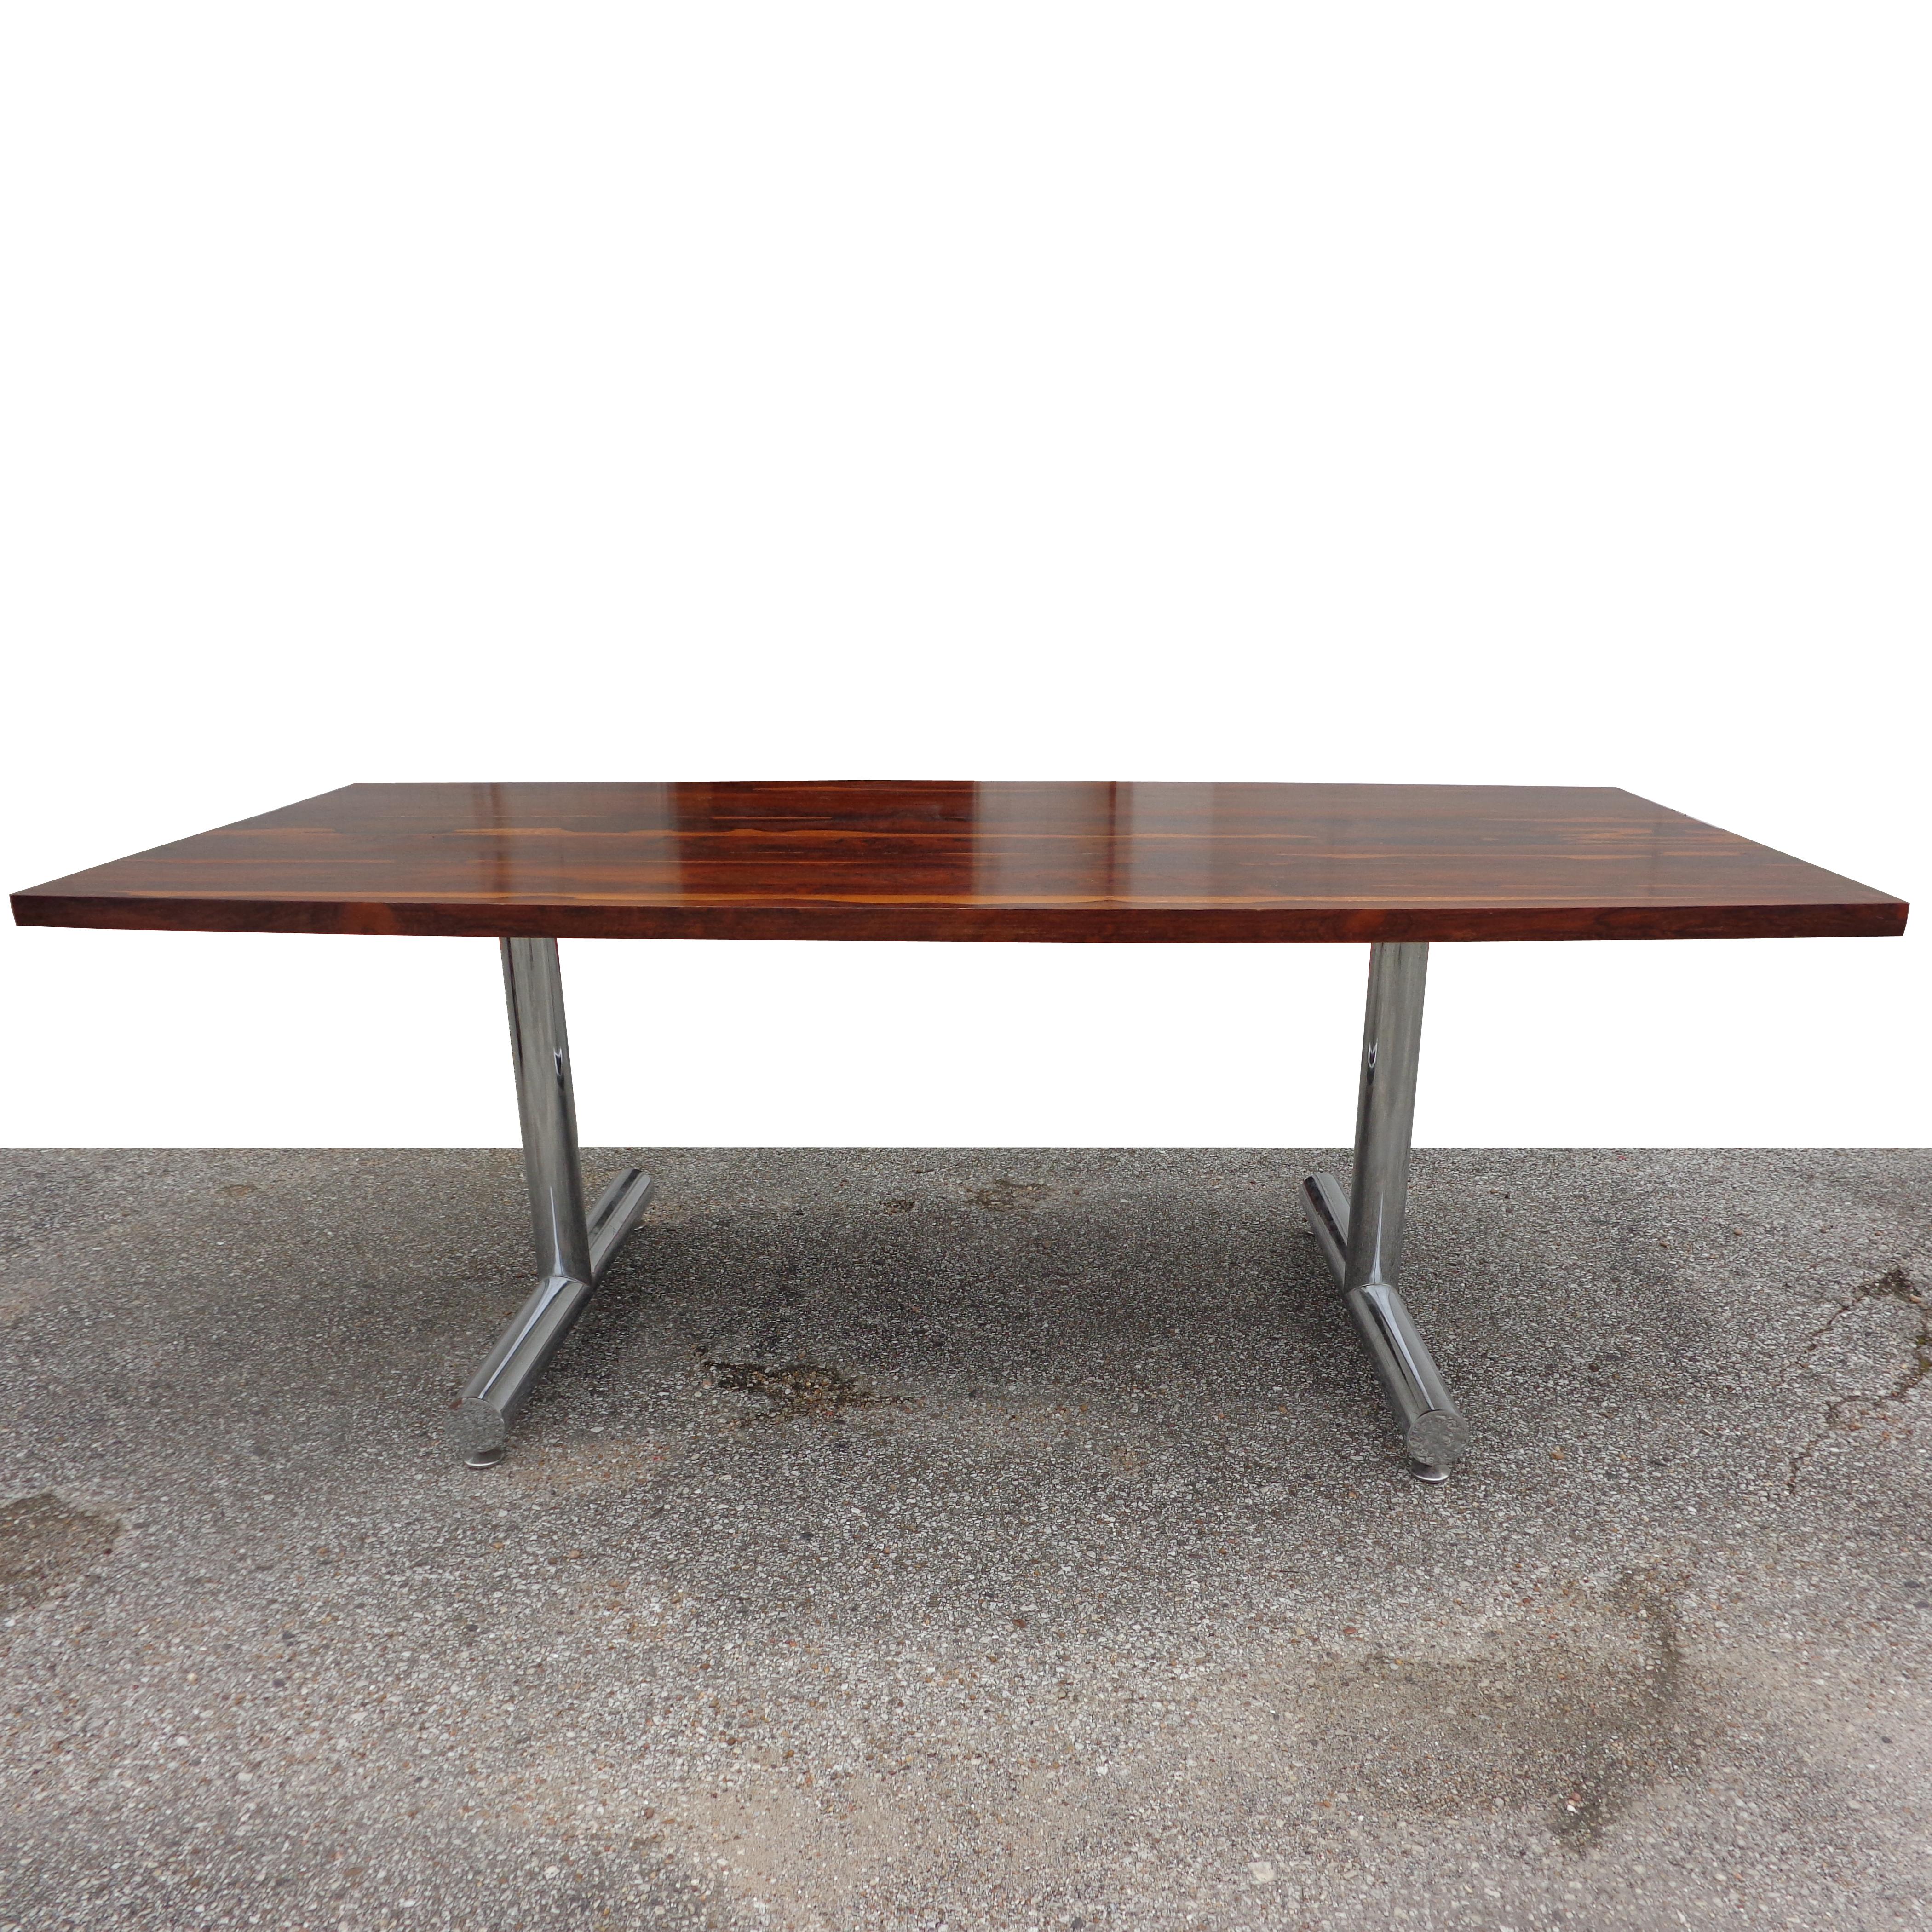 Rosewood Chrome Table Desk by Tim Bates for Pieff Furniture In Good Condition For Sale In Pasadena, TX